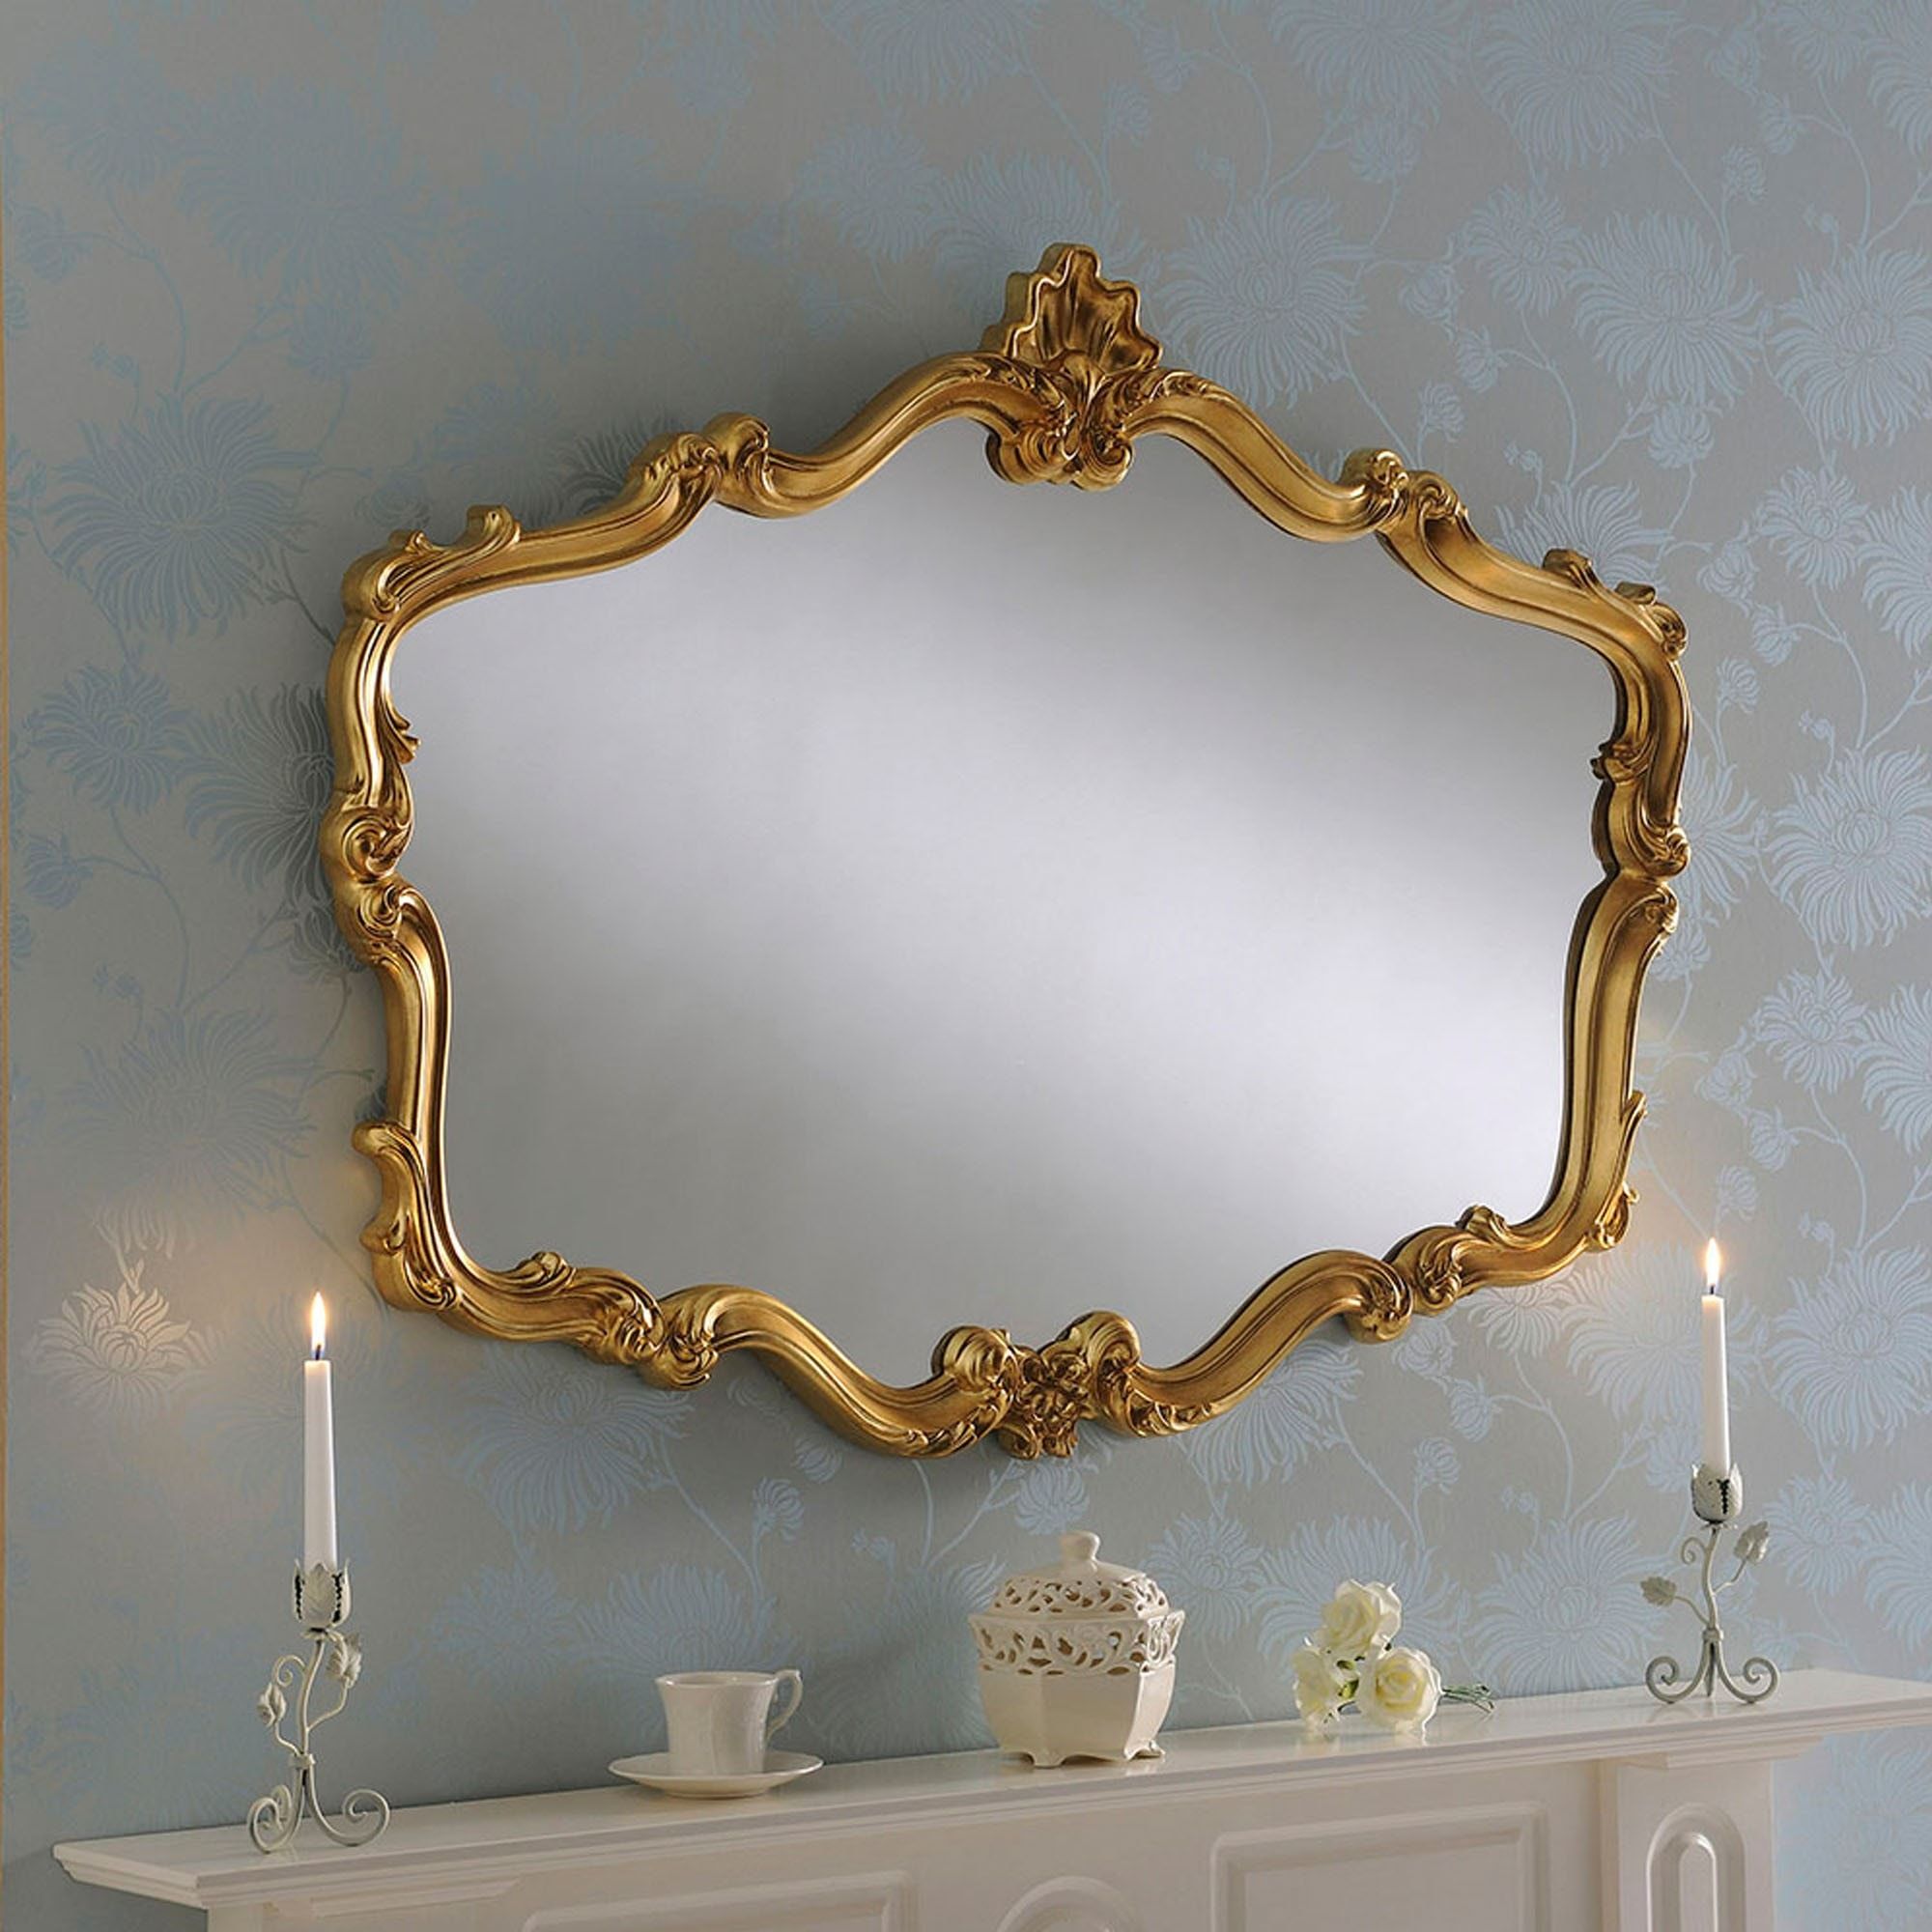 Antique French Style Gold Decorative Mirror | Gold Decorative Mirror Within Accent Mirrors (View 6 of 15)